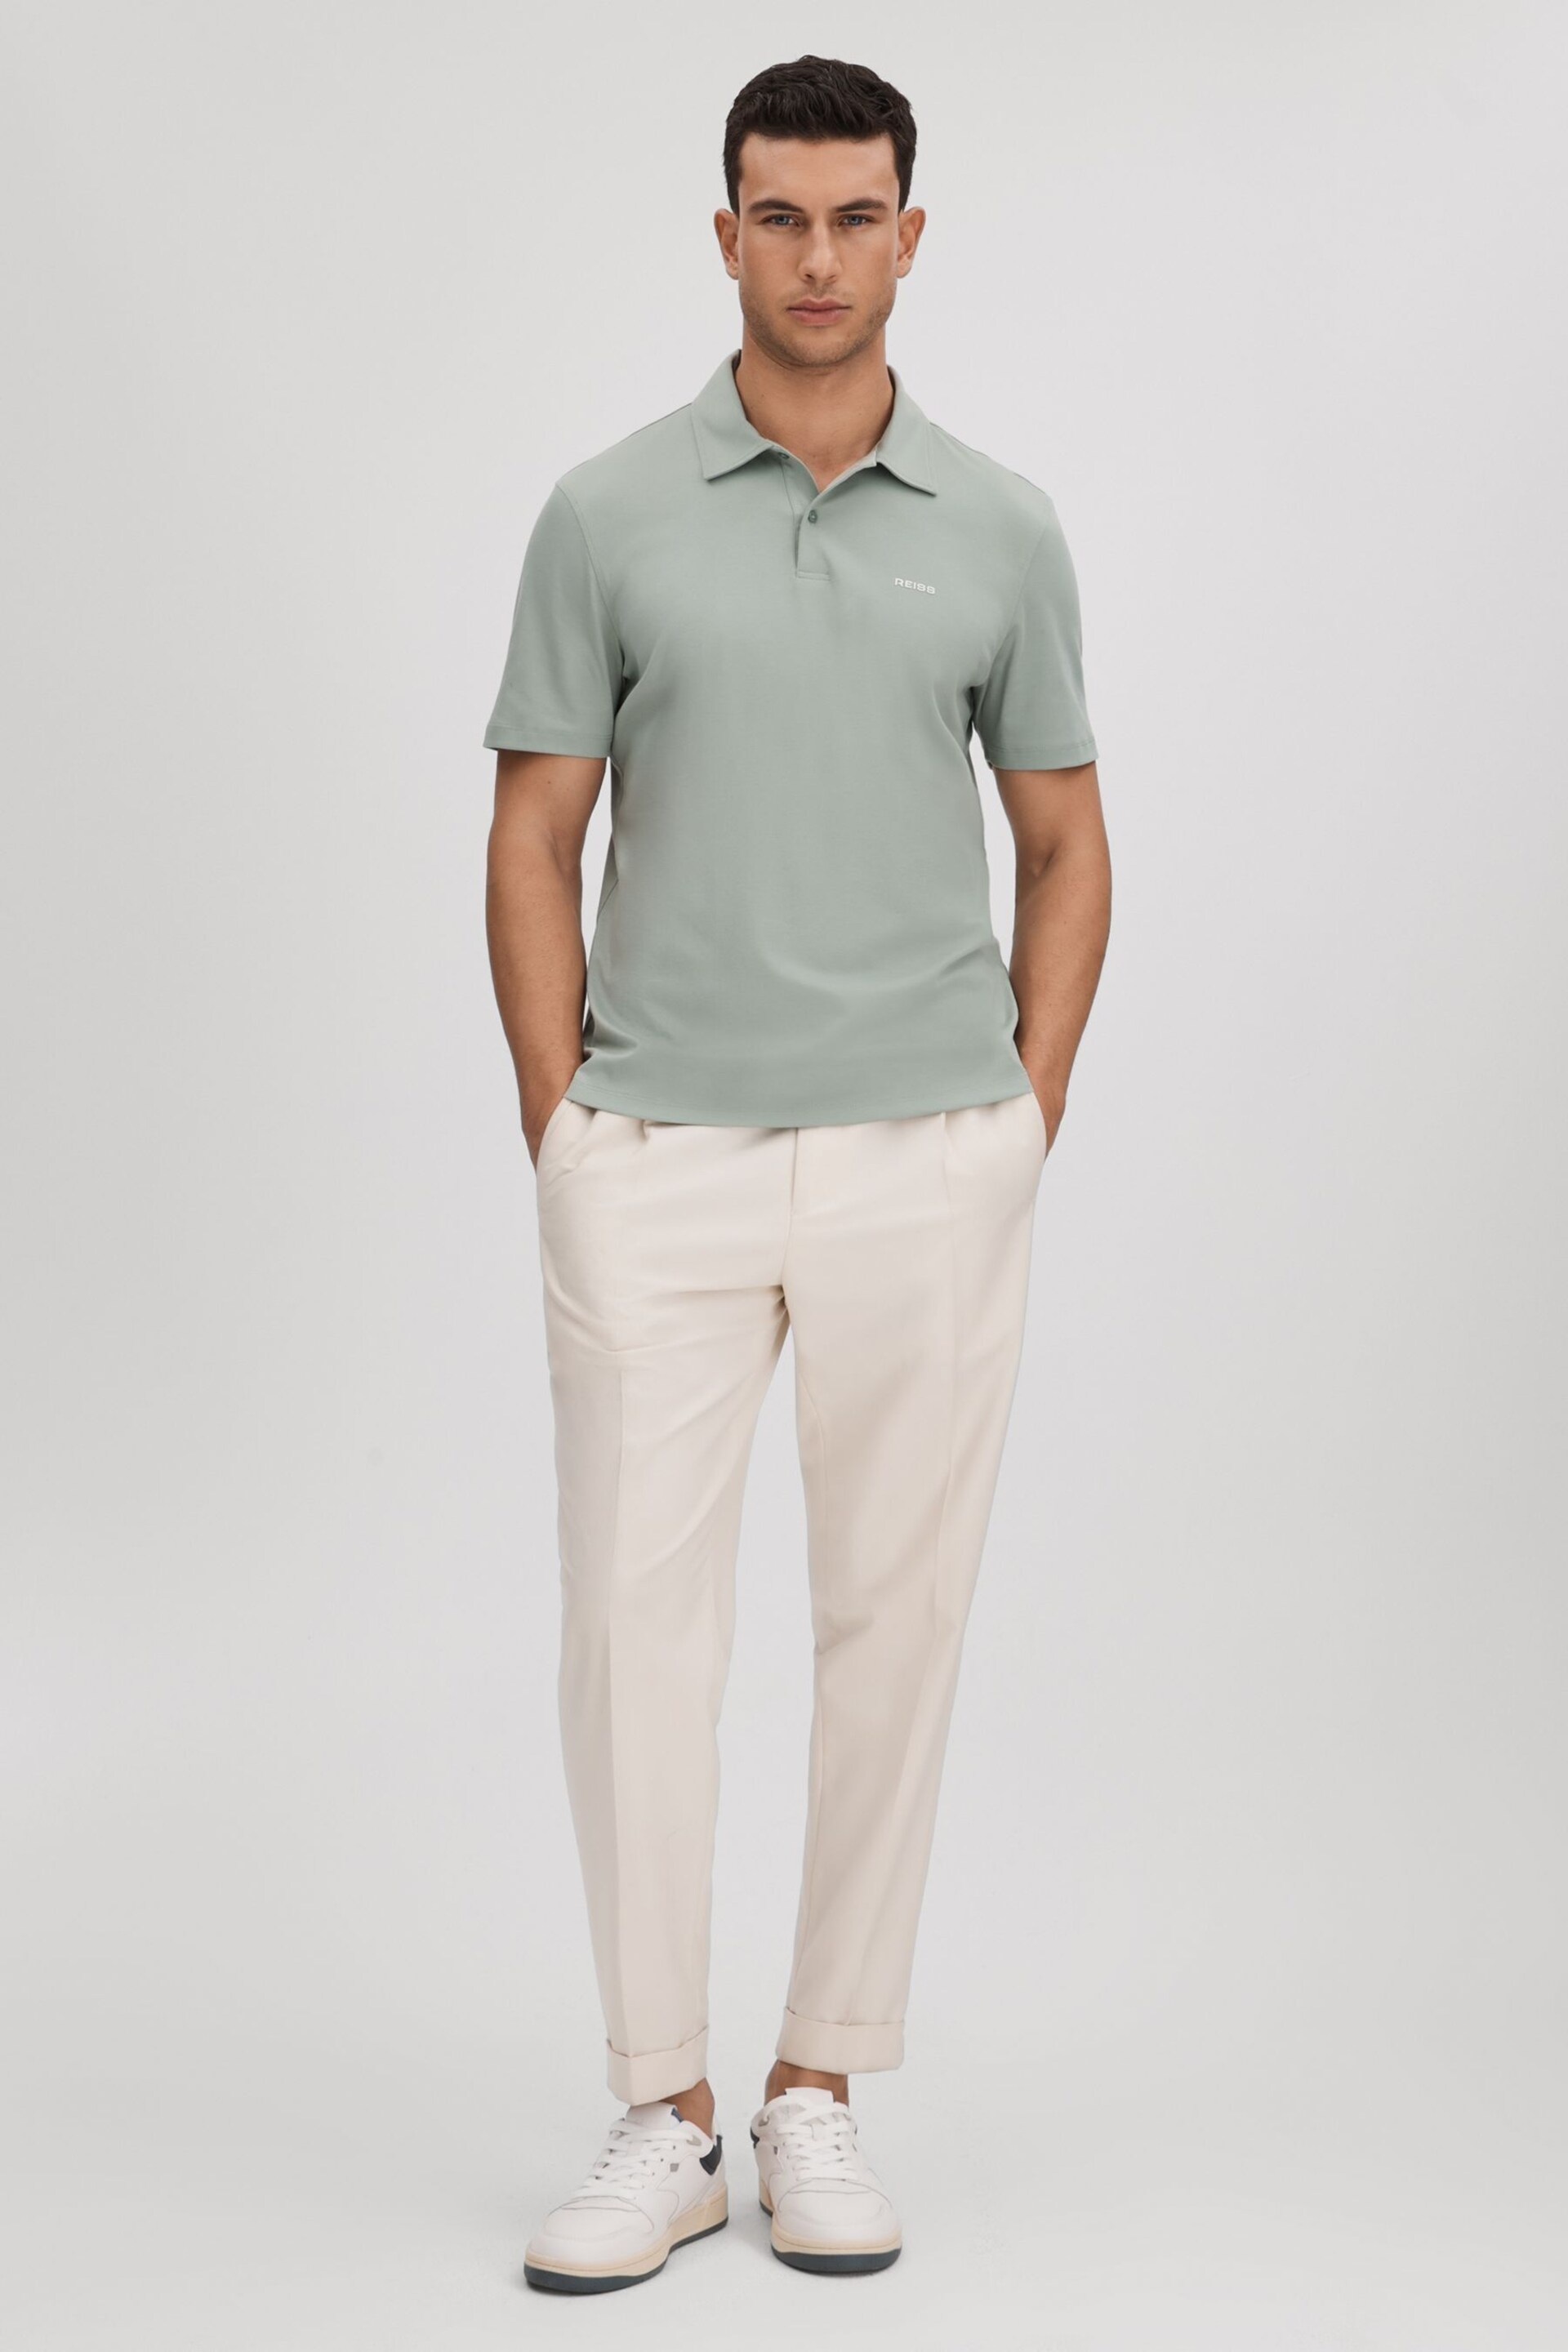 Reiss Sage Owens Slim Fit Cotton Polo Shirt - Image 3 of 6